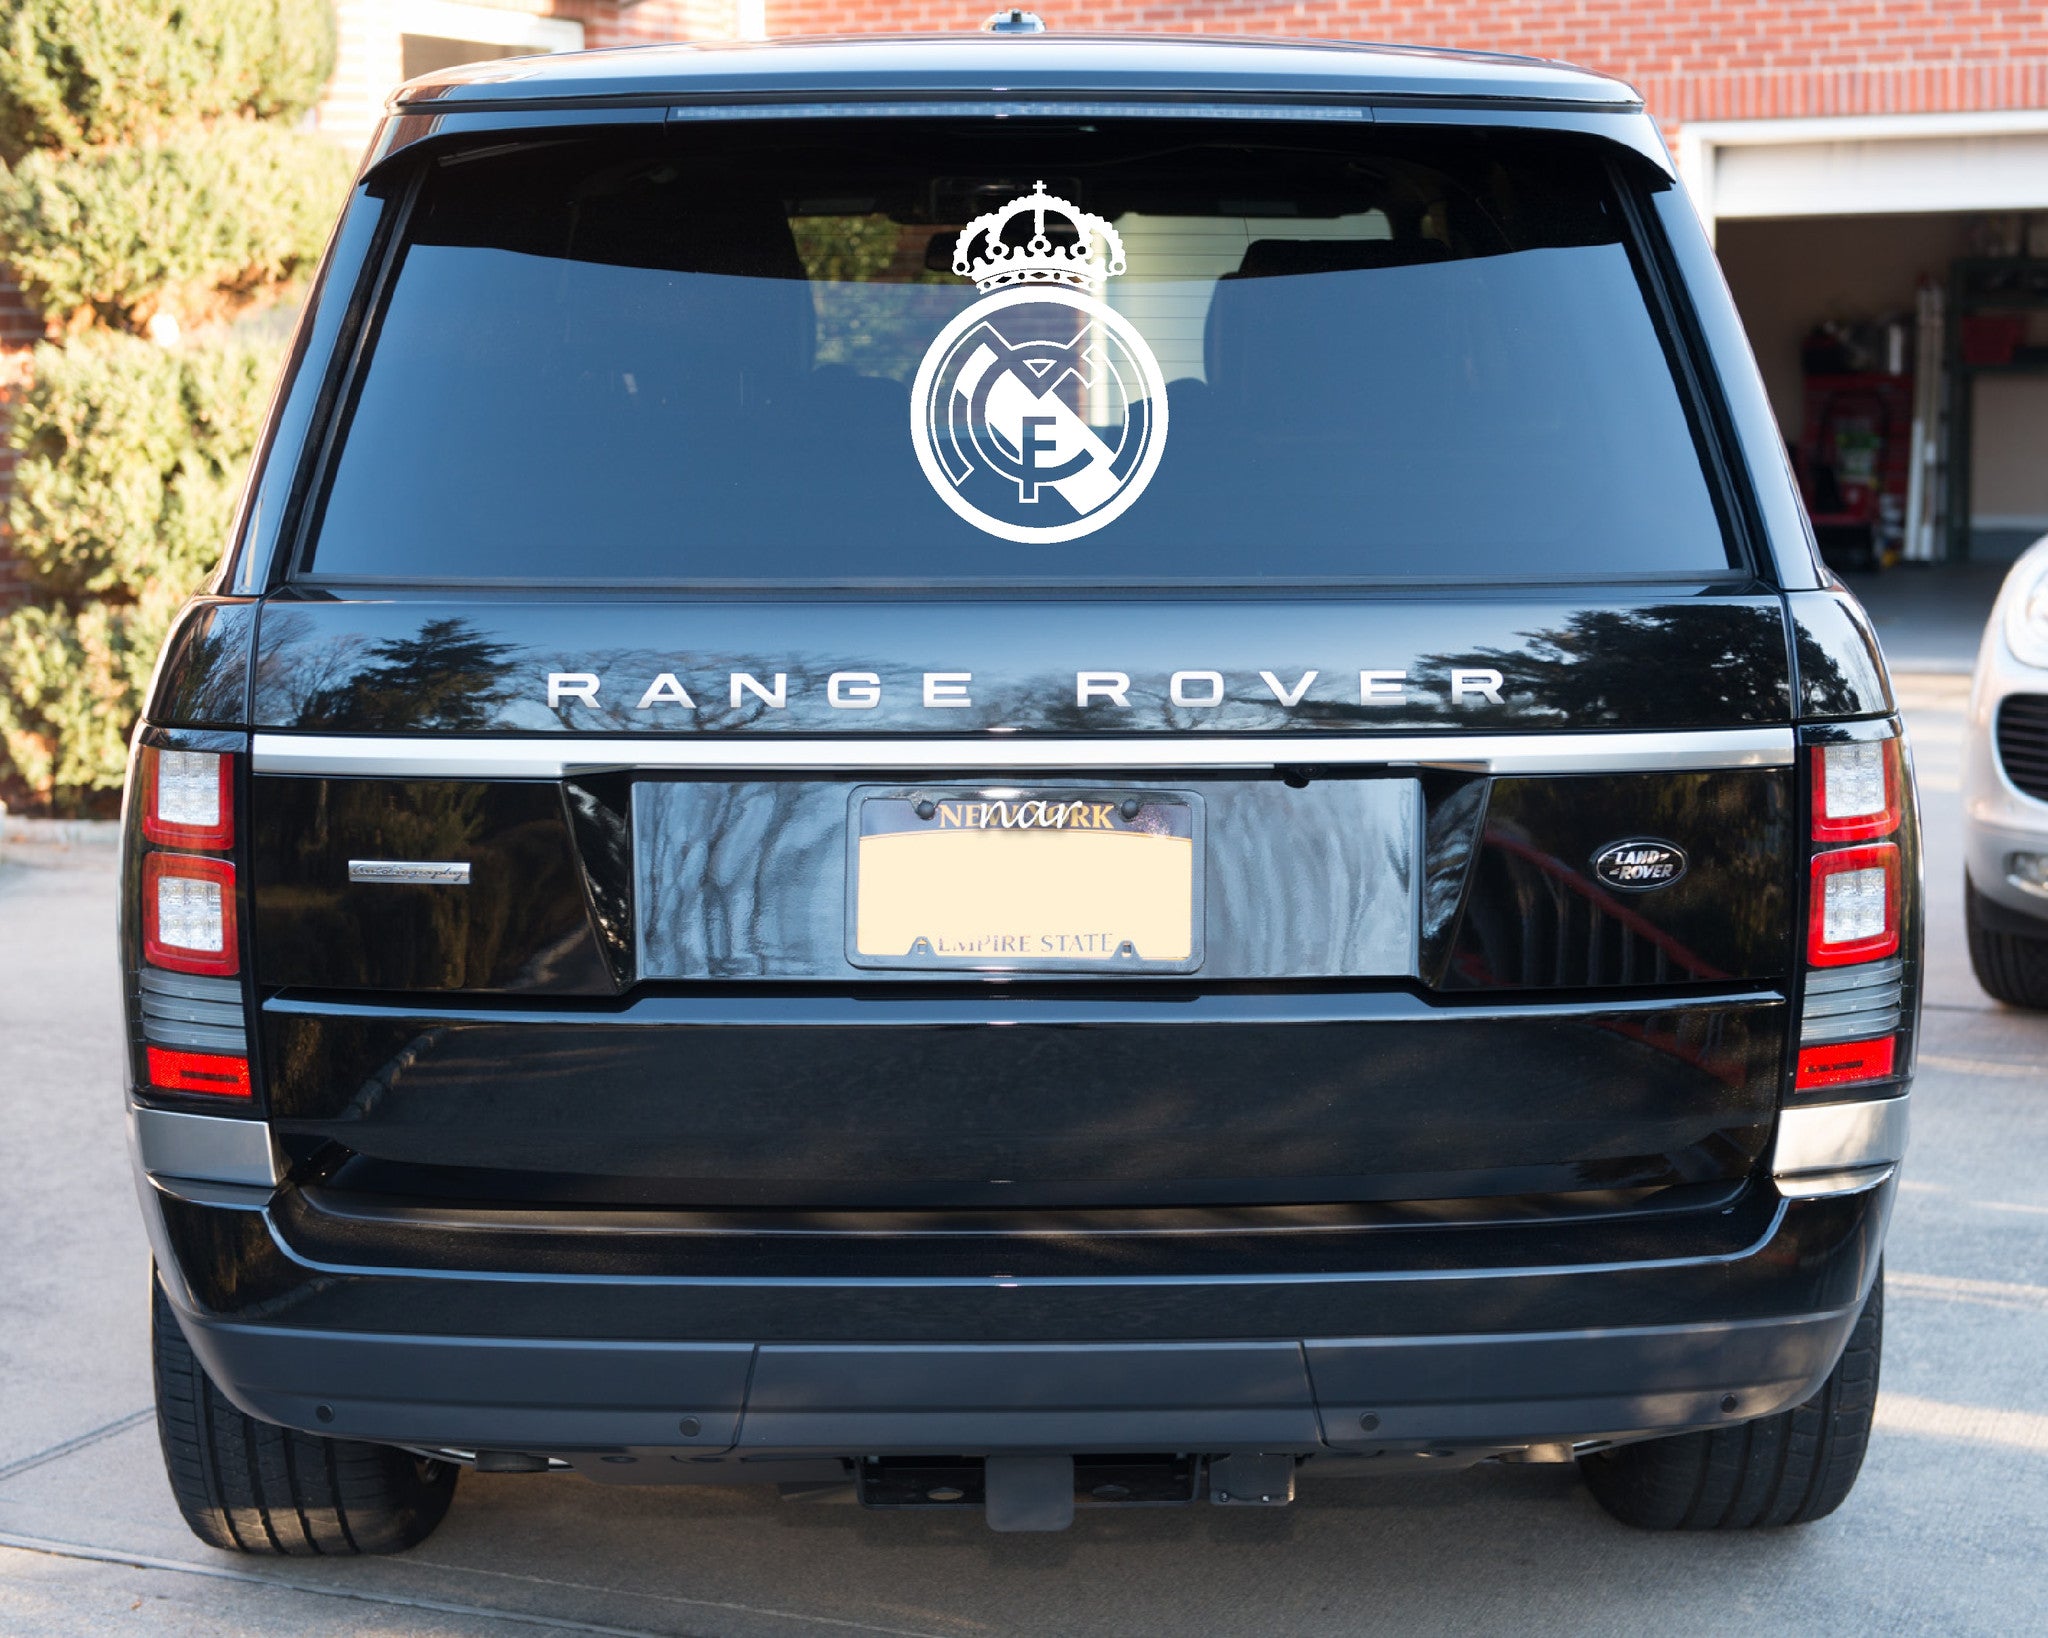 Real Madrid Badge Car Sticker, for the foxes fan! – Wall 